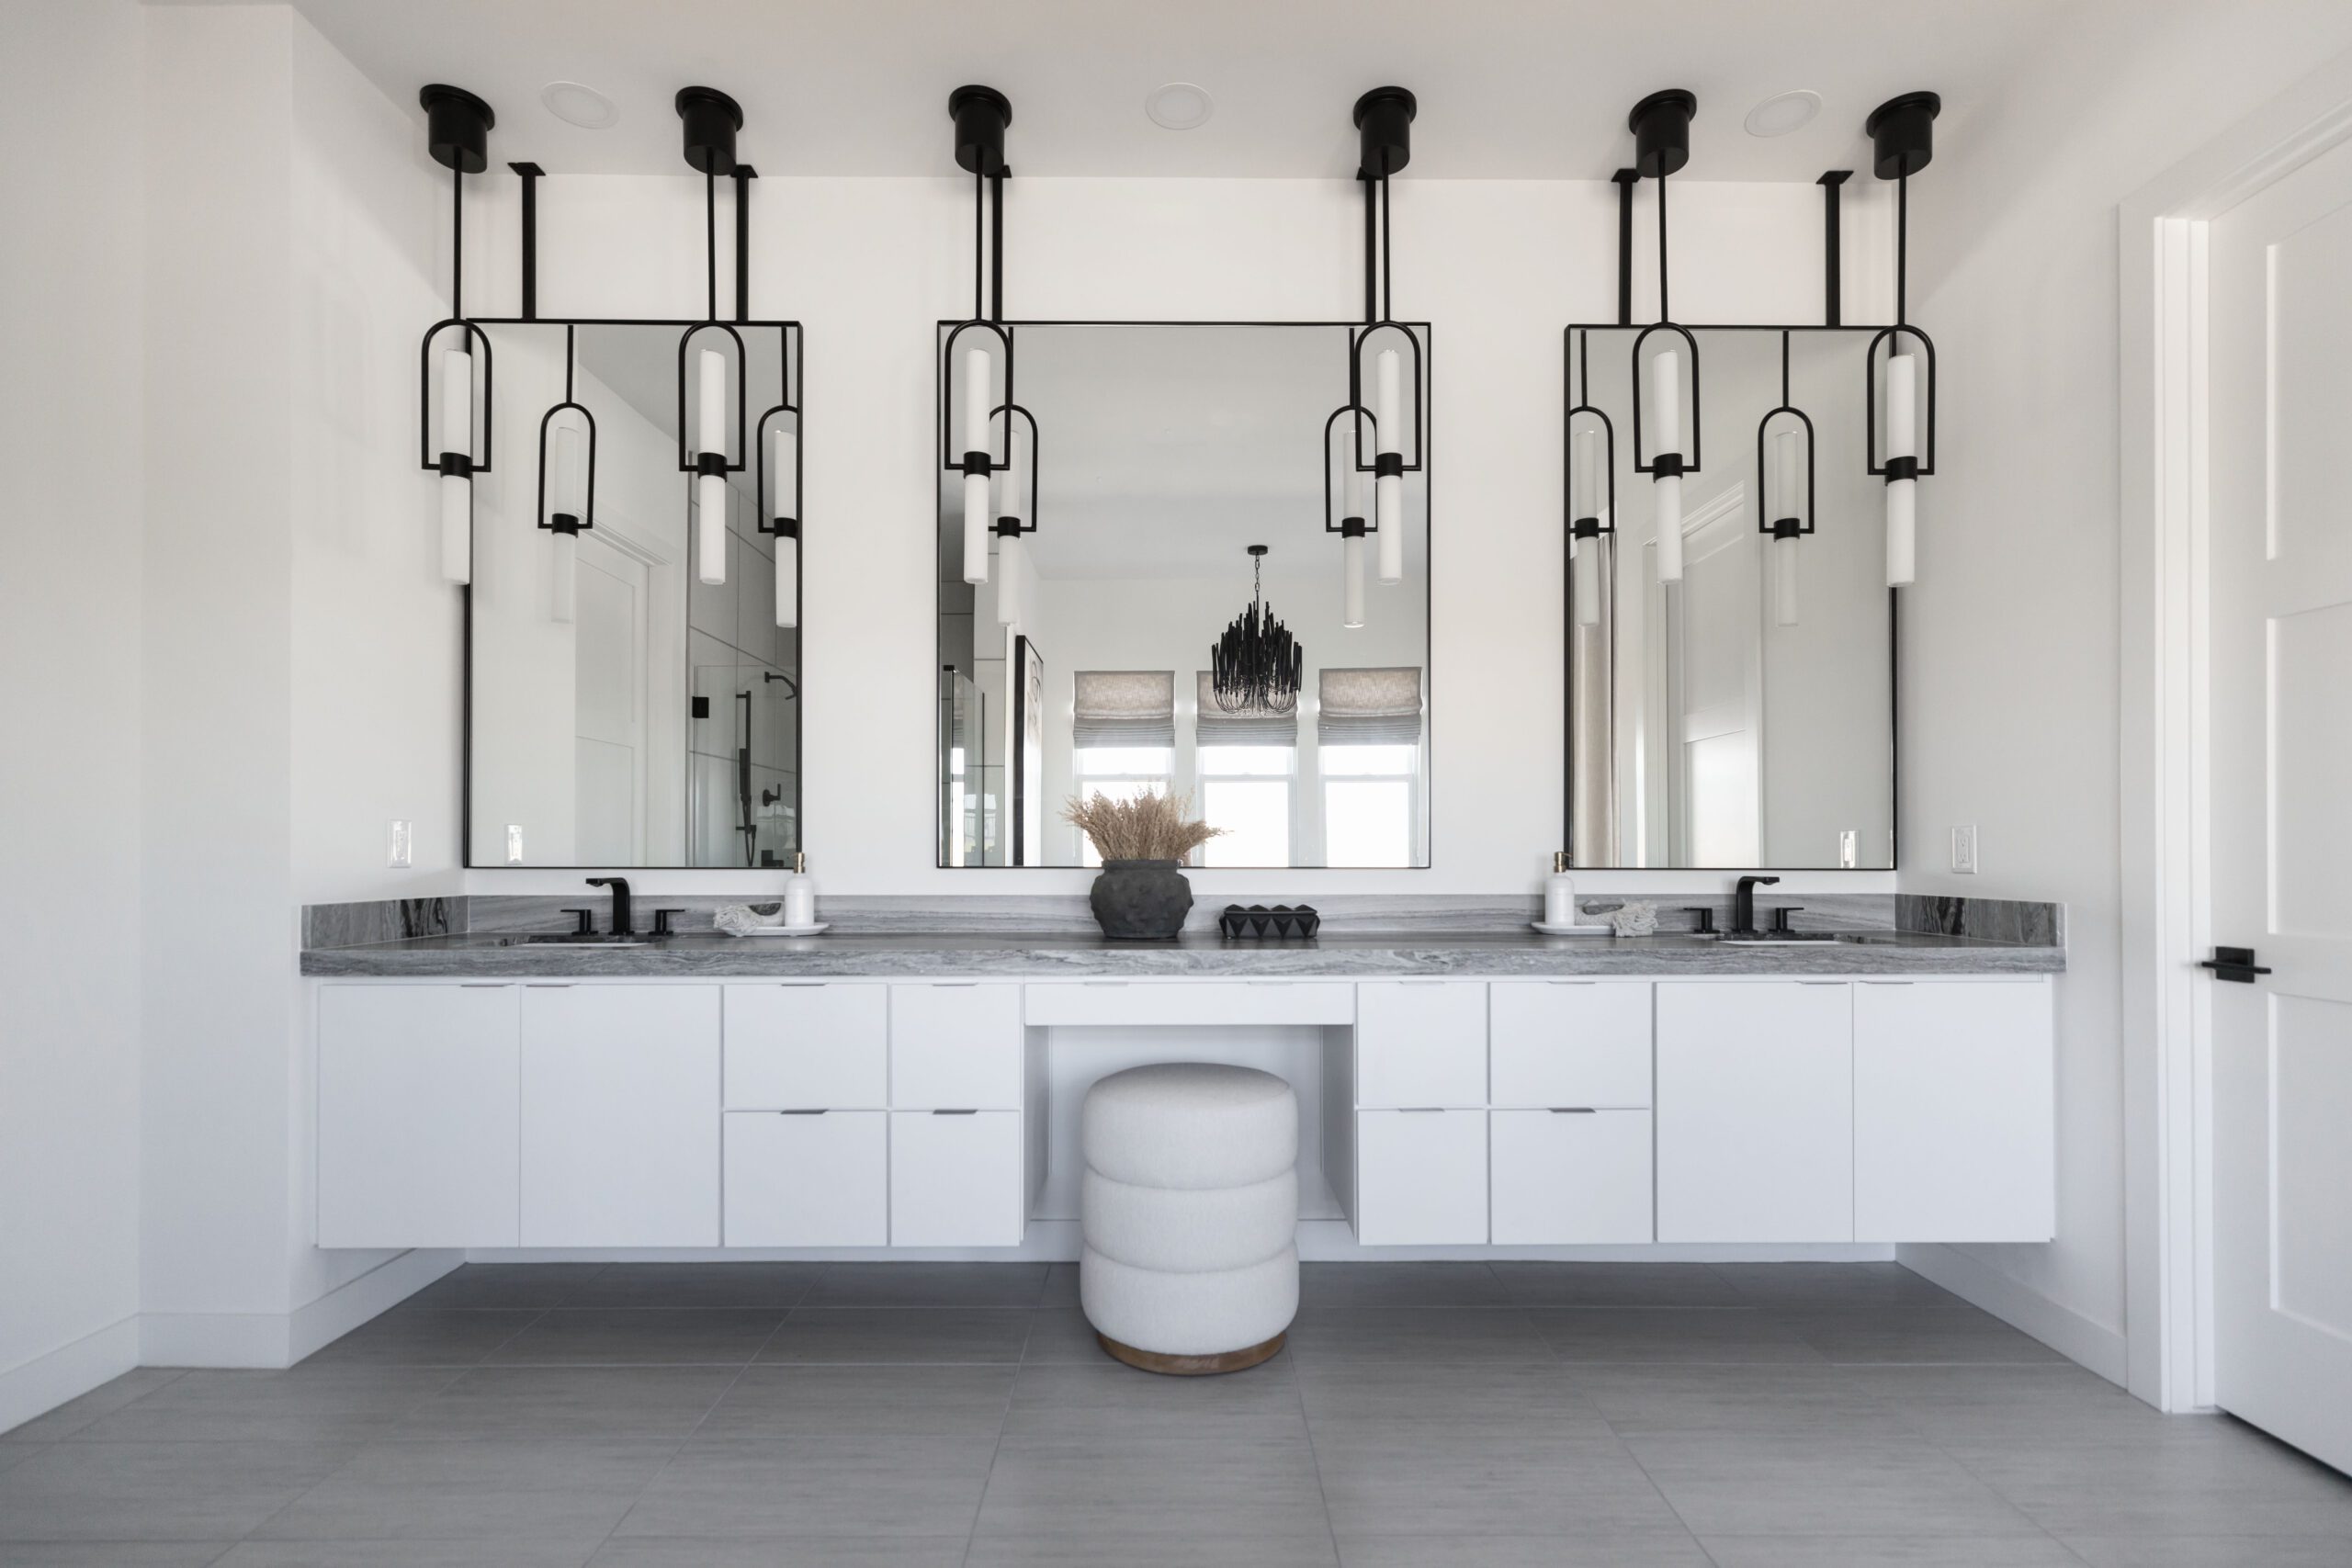 Efficient and aesthetic lighting and electrical installations in a Phoenix bathroom remodel.